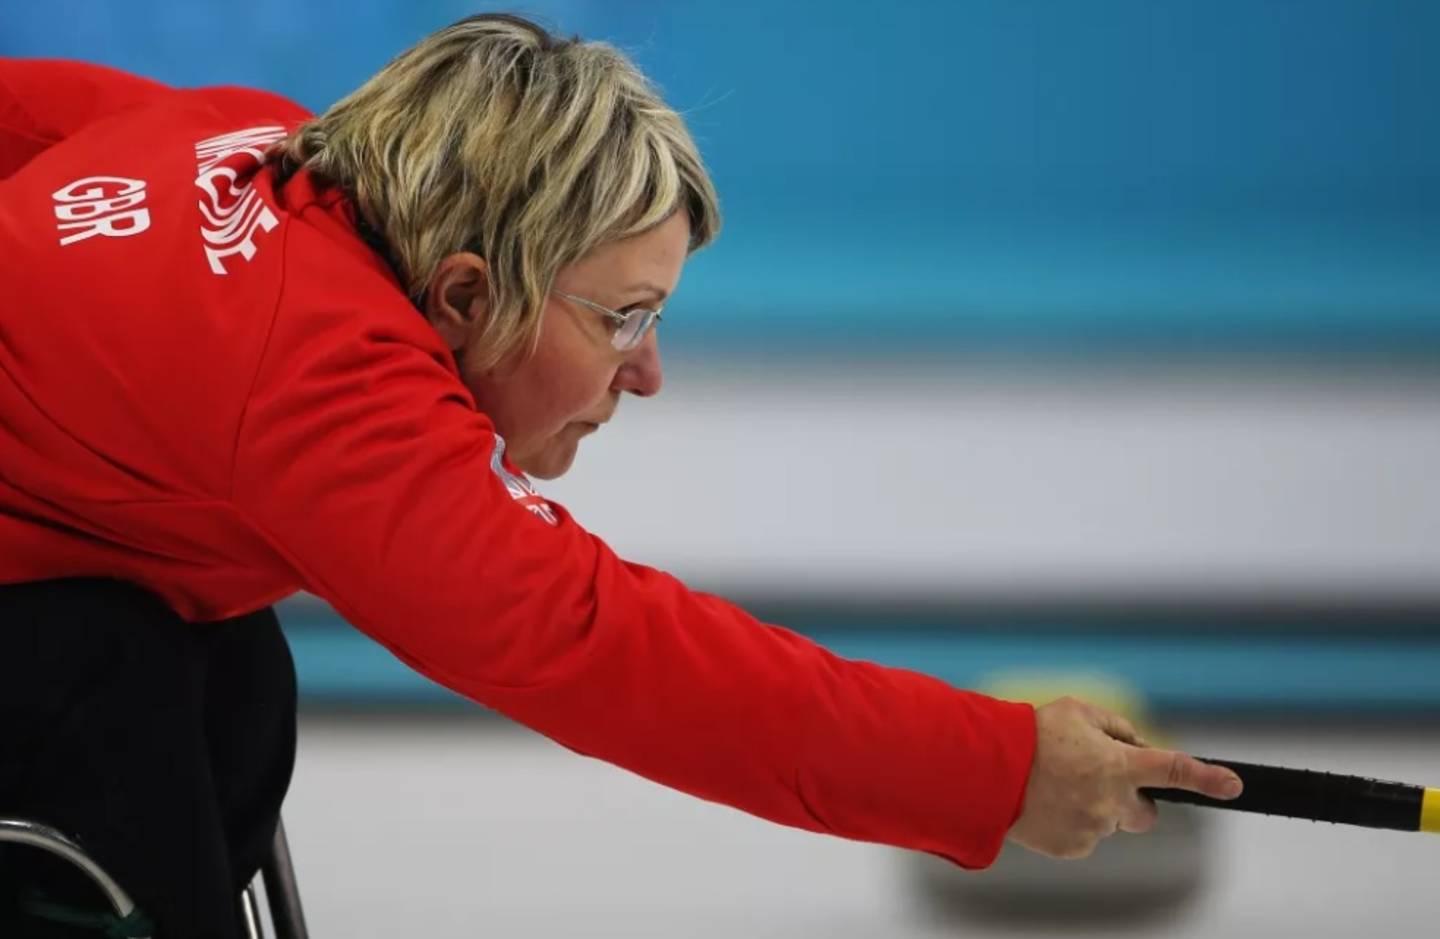 Angie Malone on the ice in Sochi 2014